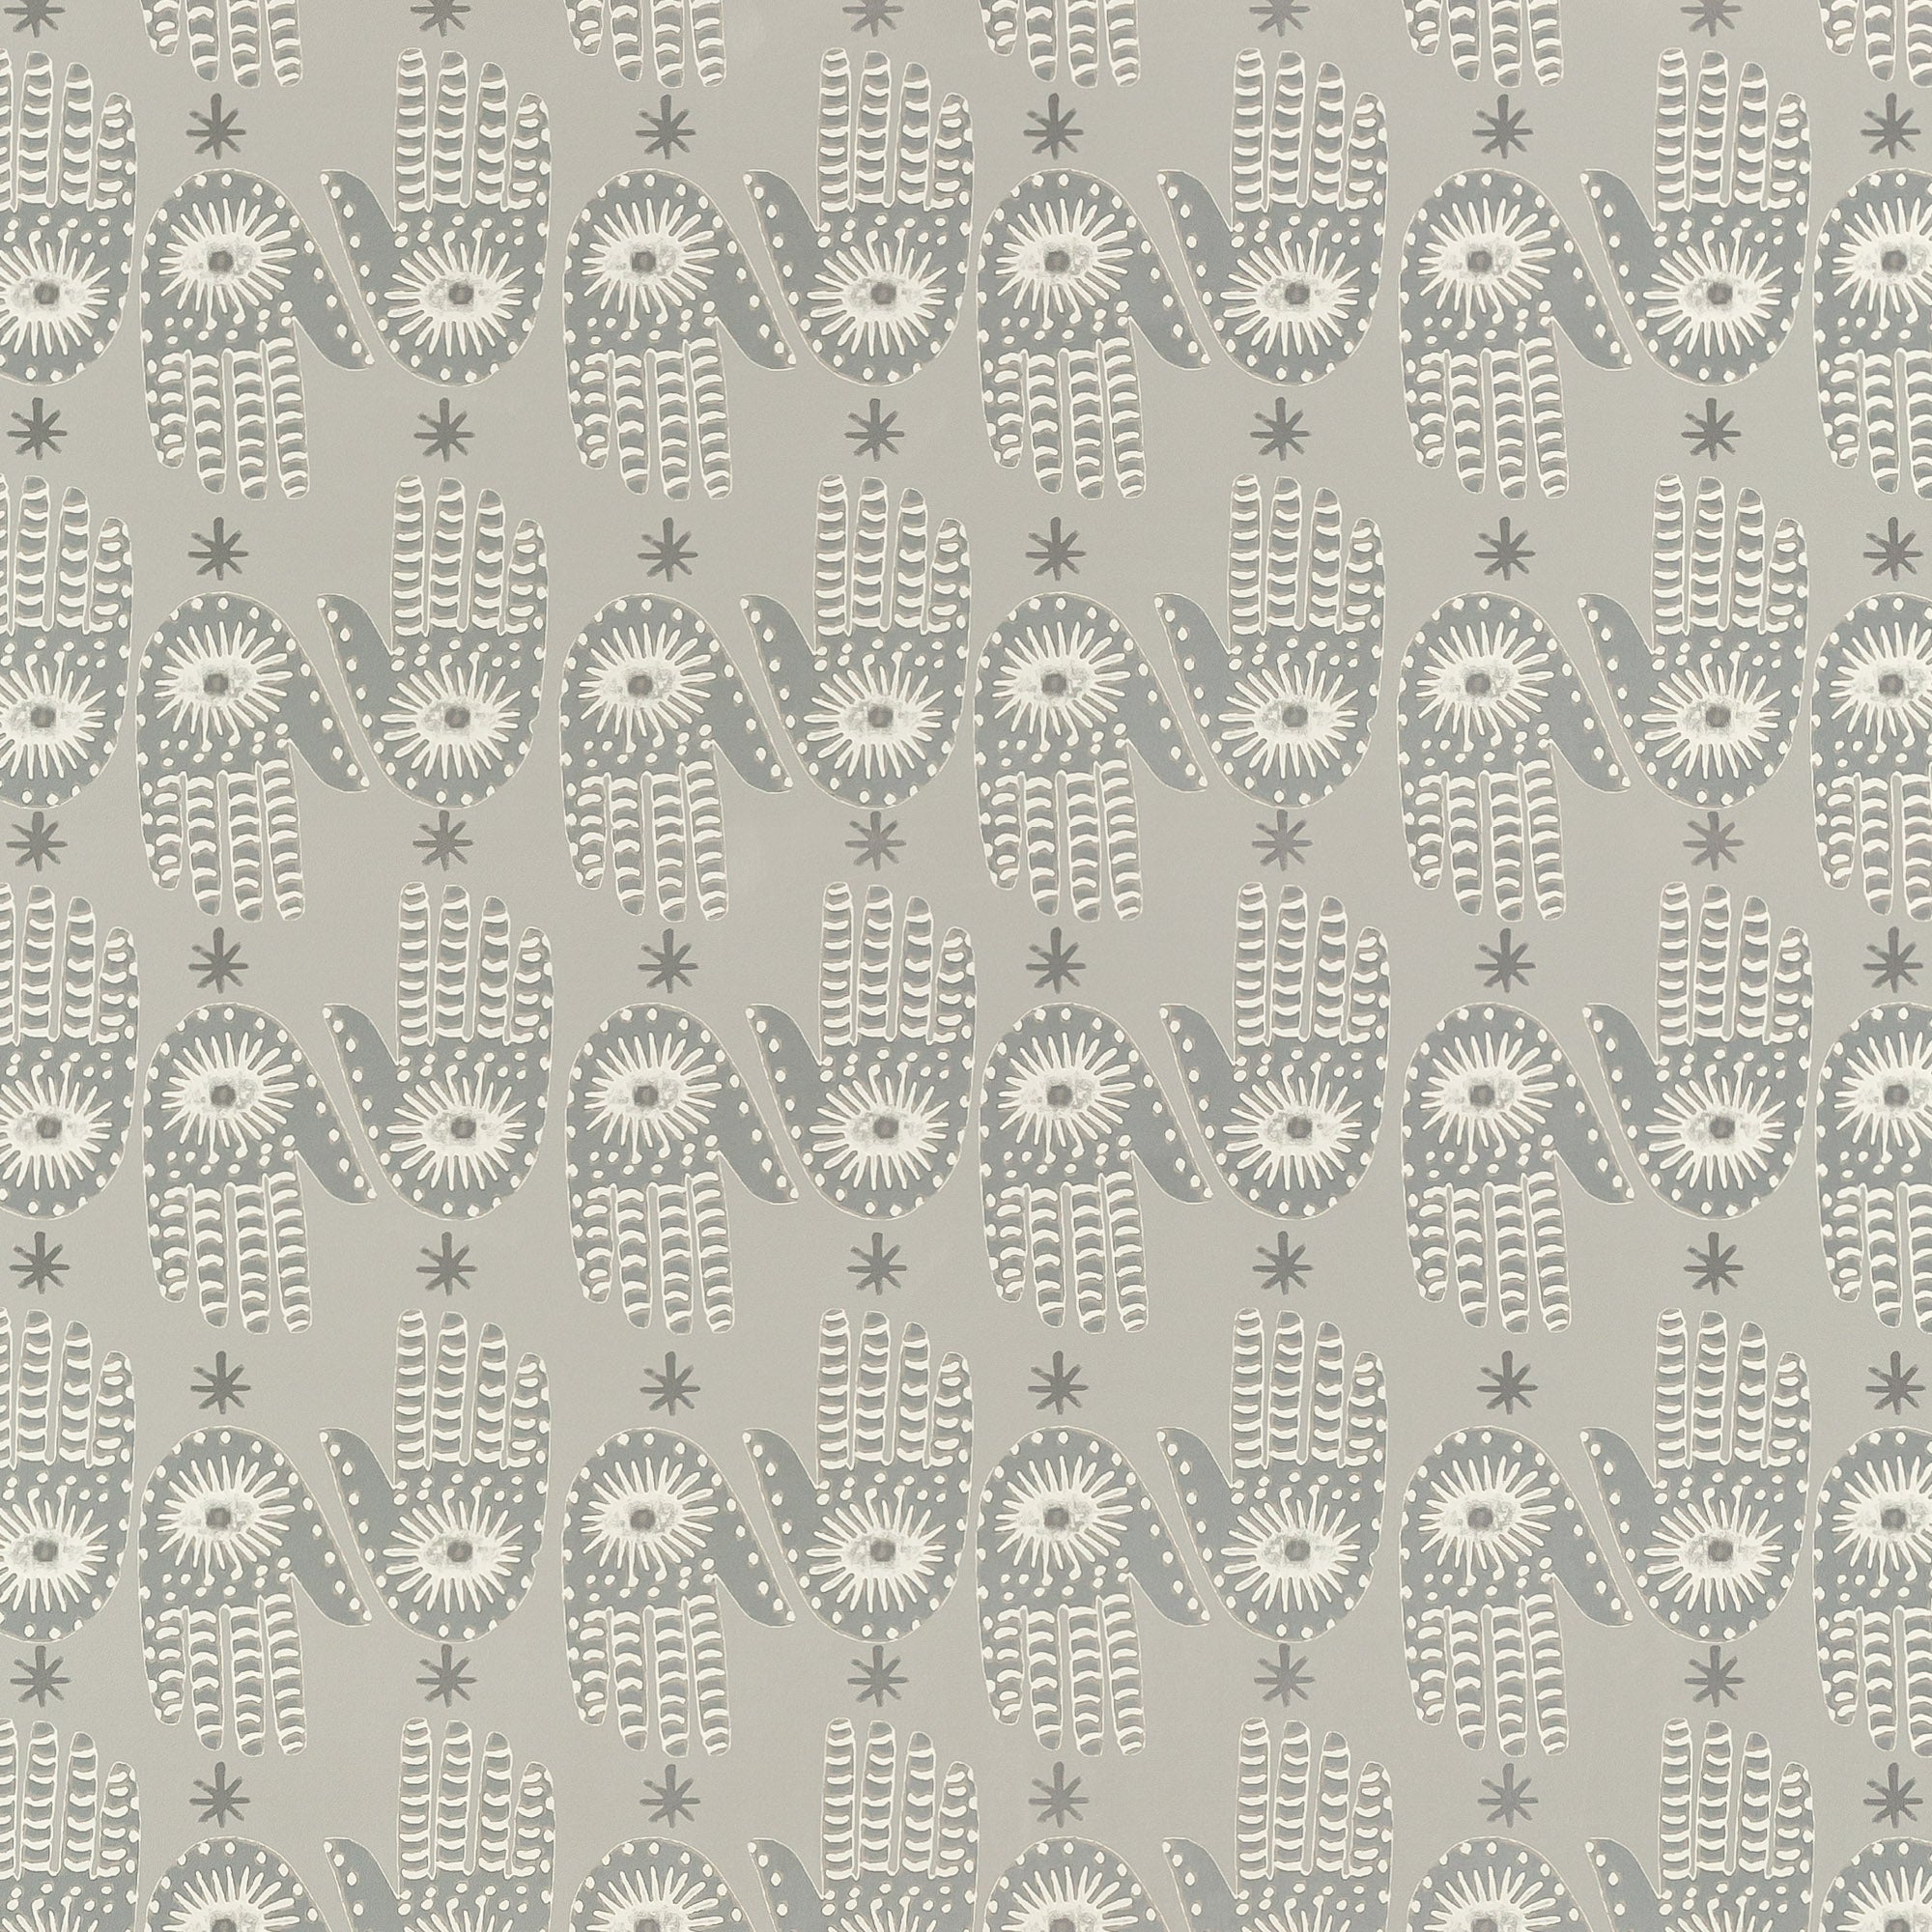 Detail of wallpaper in a playful hamsa hand print in cream and gray on a tan field.